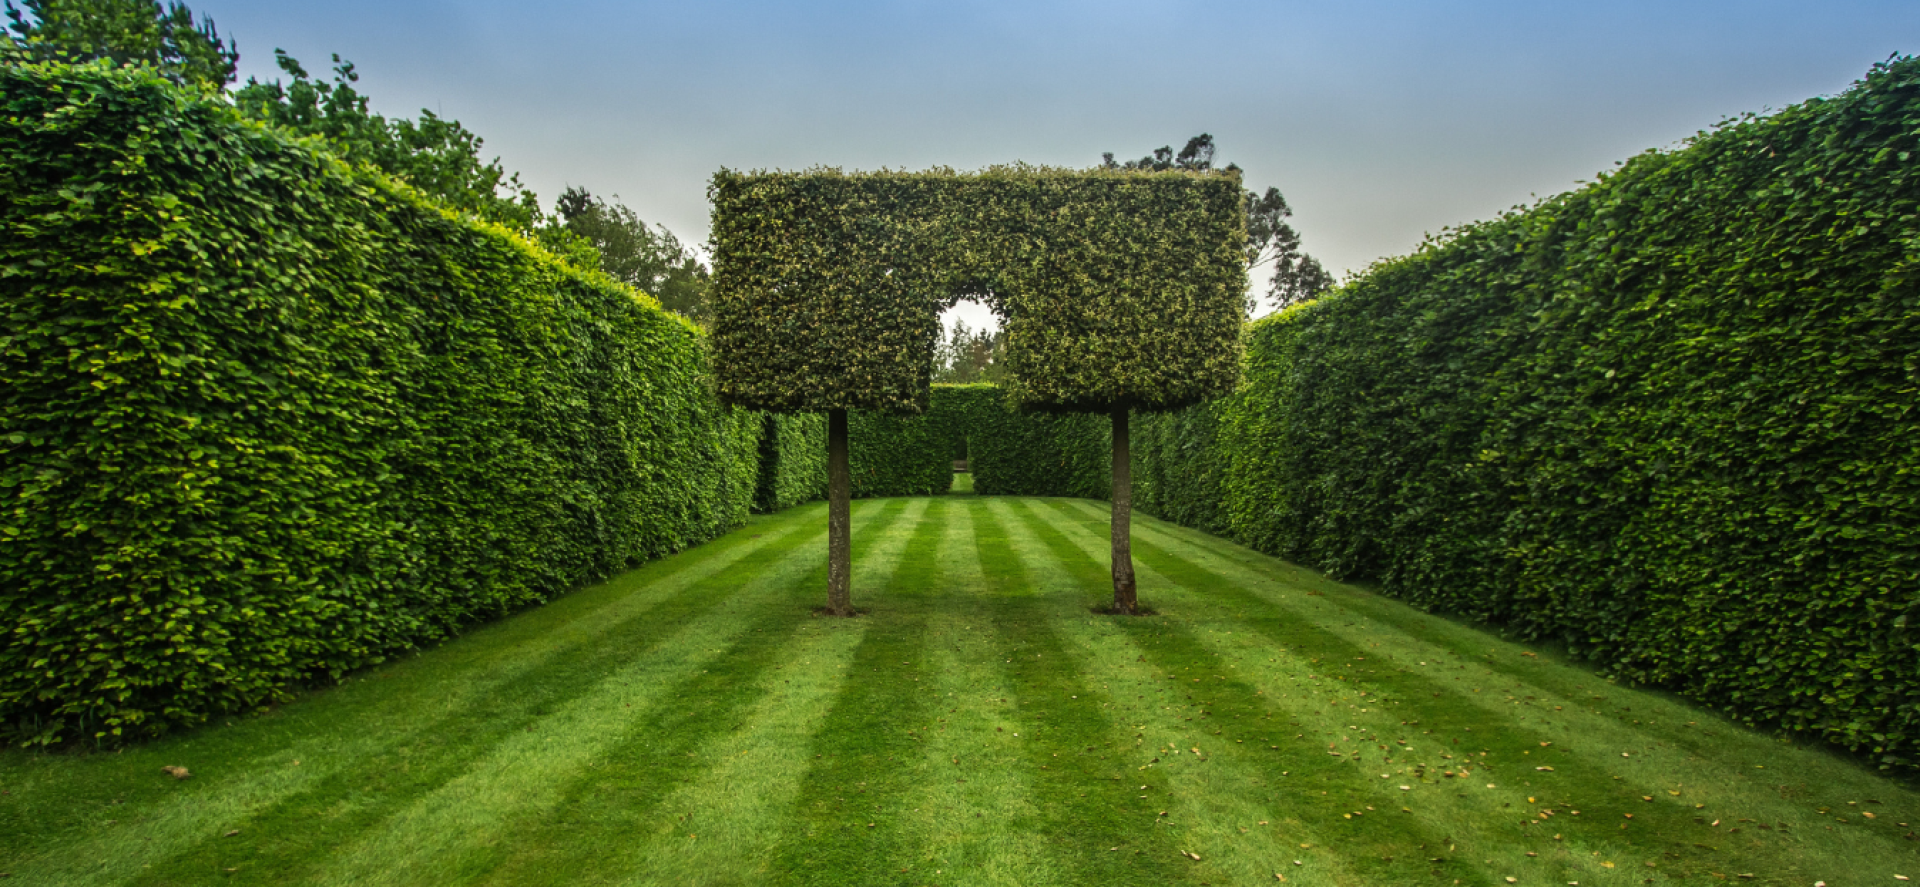 Neat hedges, representing the need for charity competitor analysis